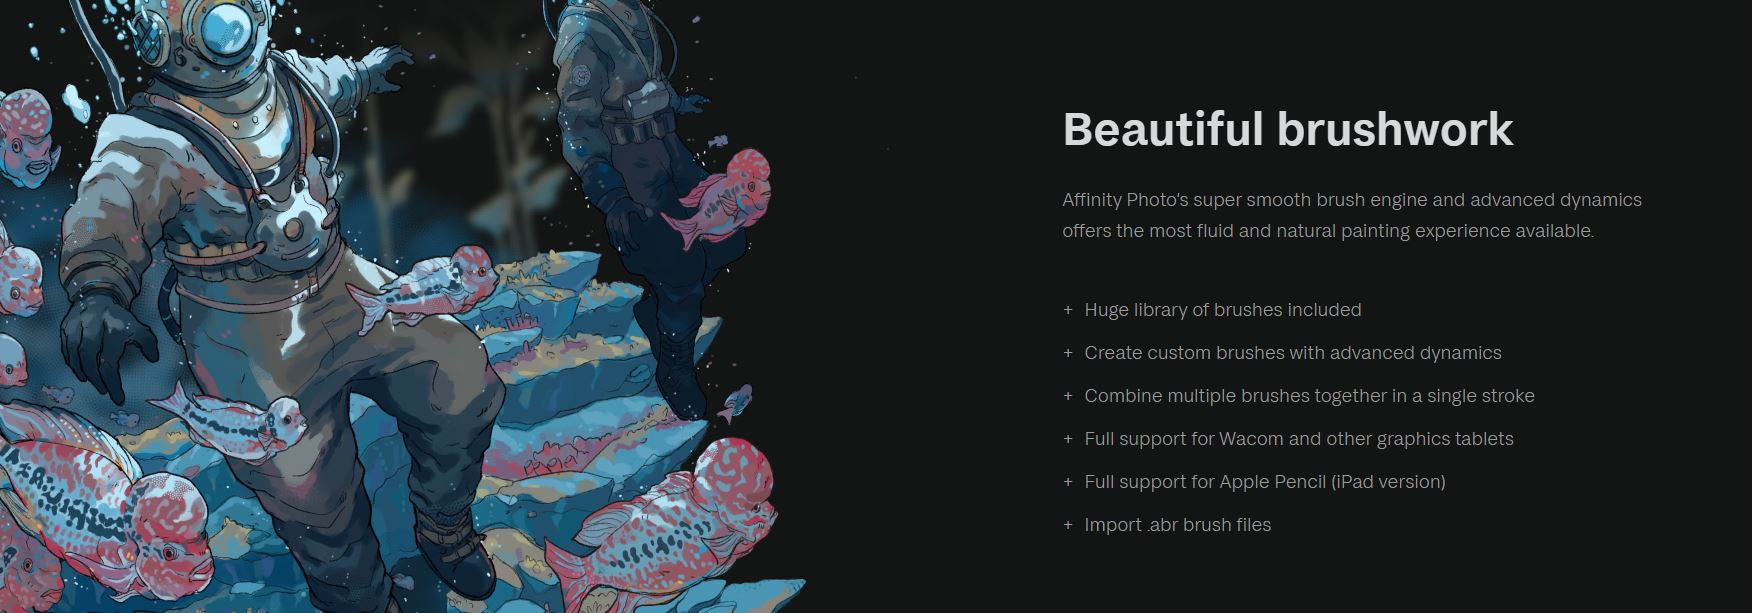 It shows the key features of Affinity photo.